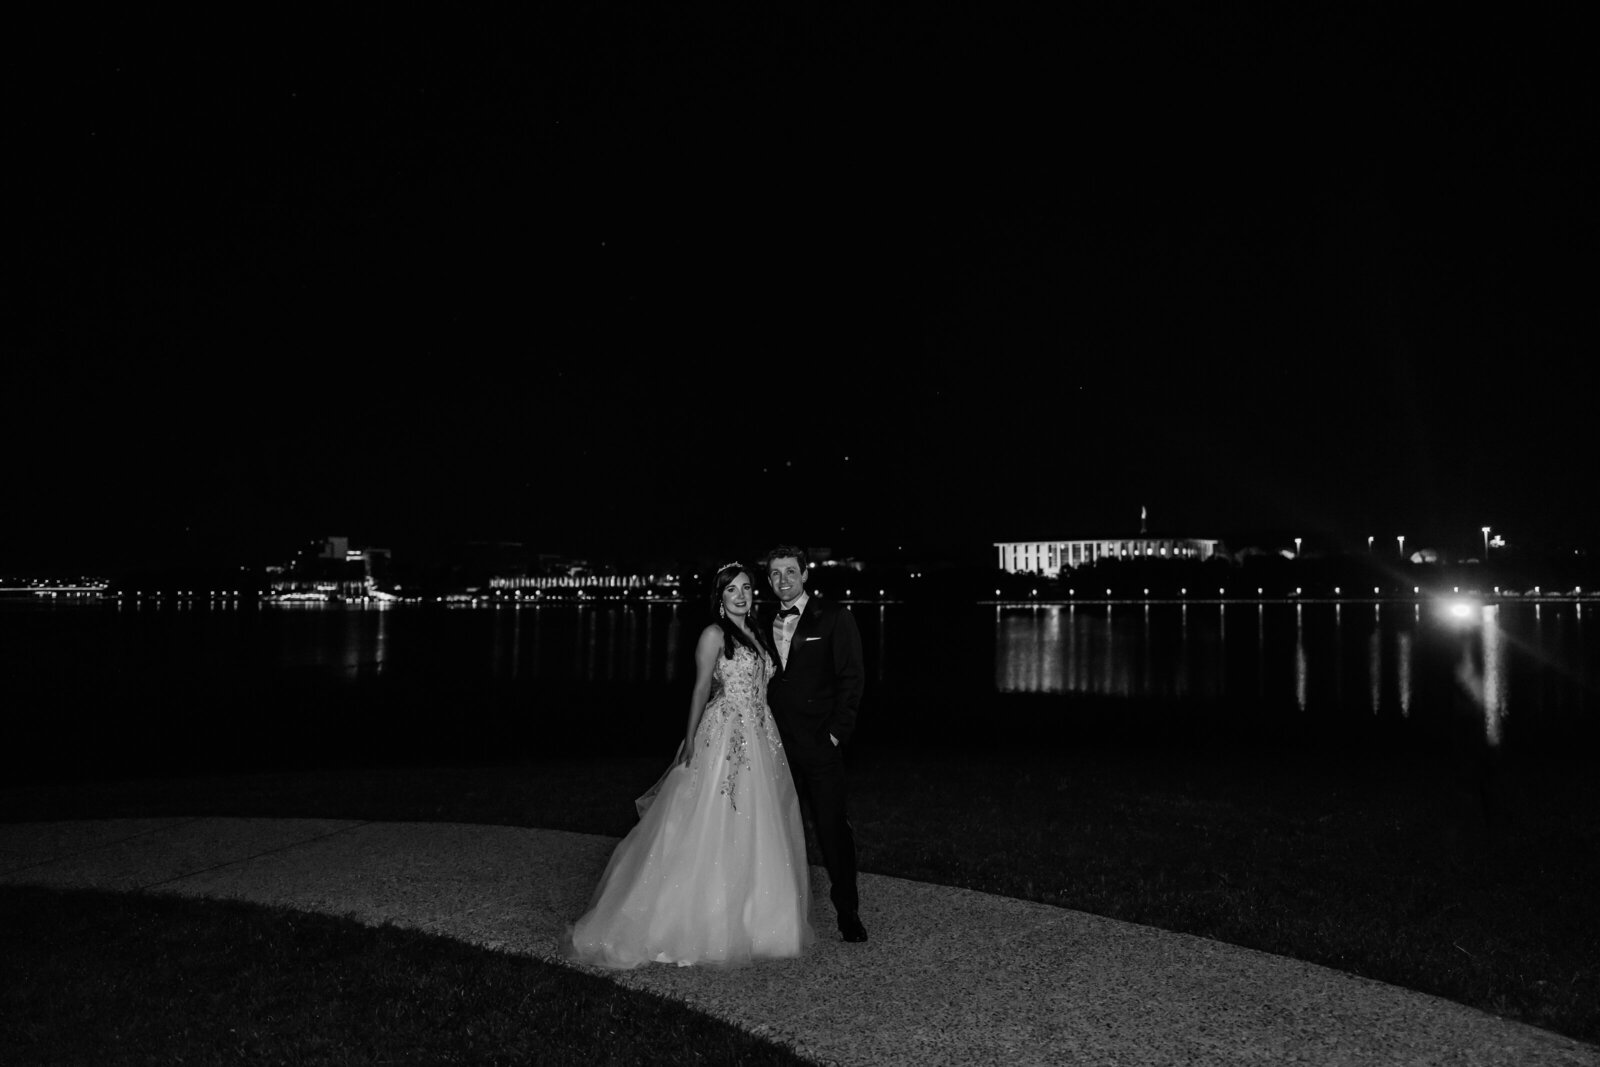 Night time weddingphoto with the Canberra light in the background